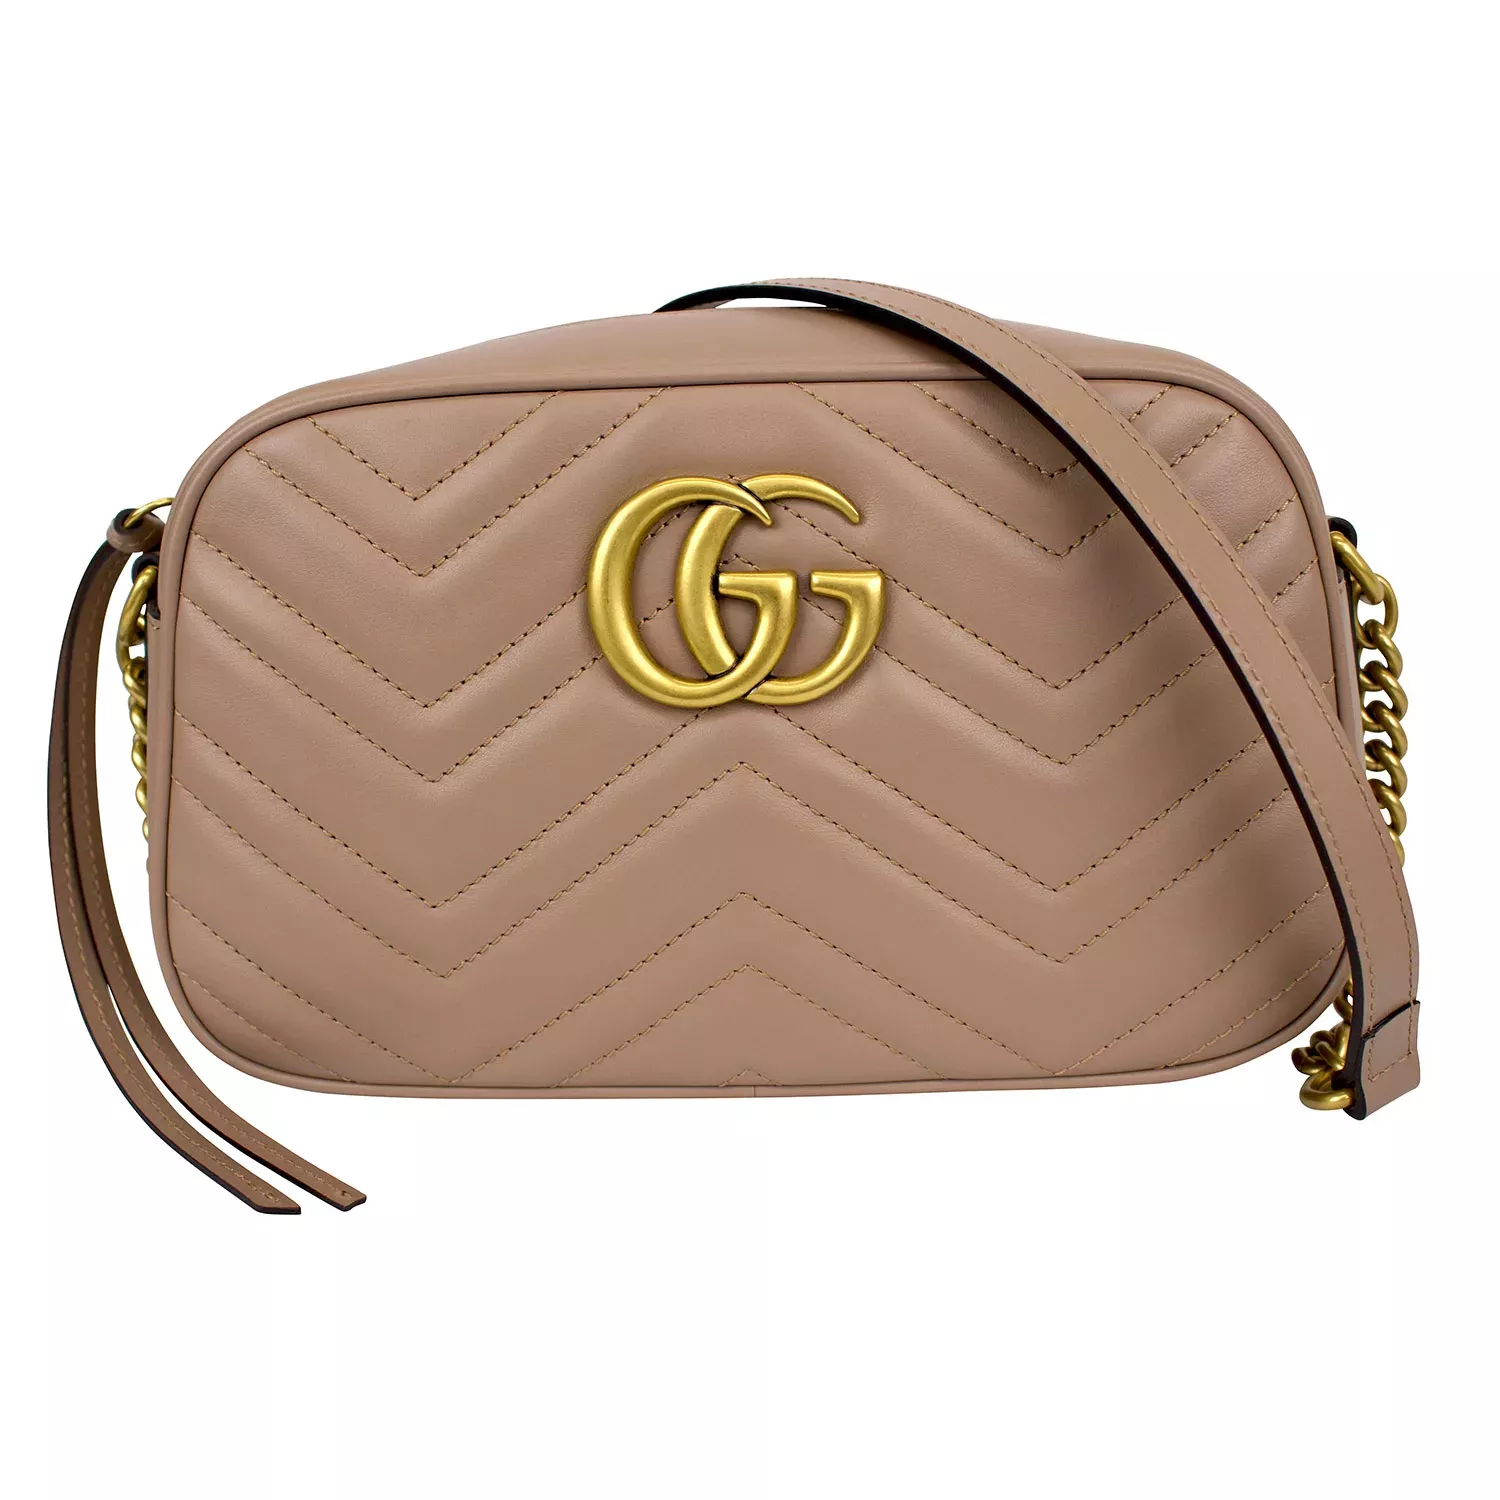 GUCCI MARMONT SMALL SHOULDER BAG- Red Leather - Fablle